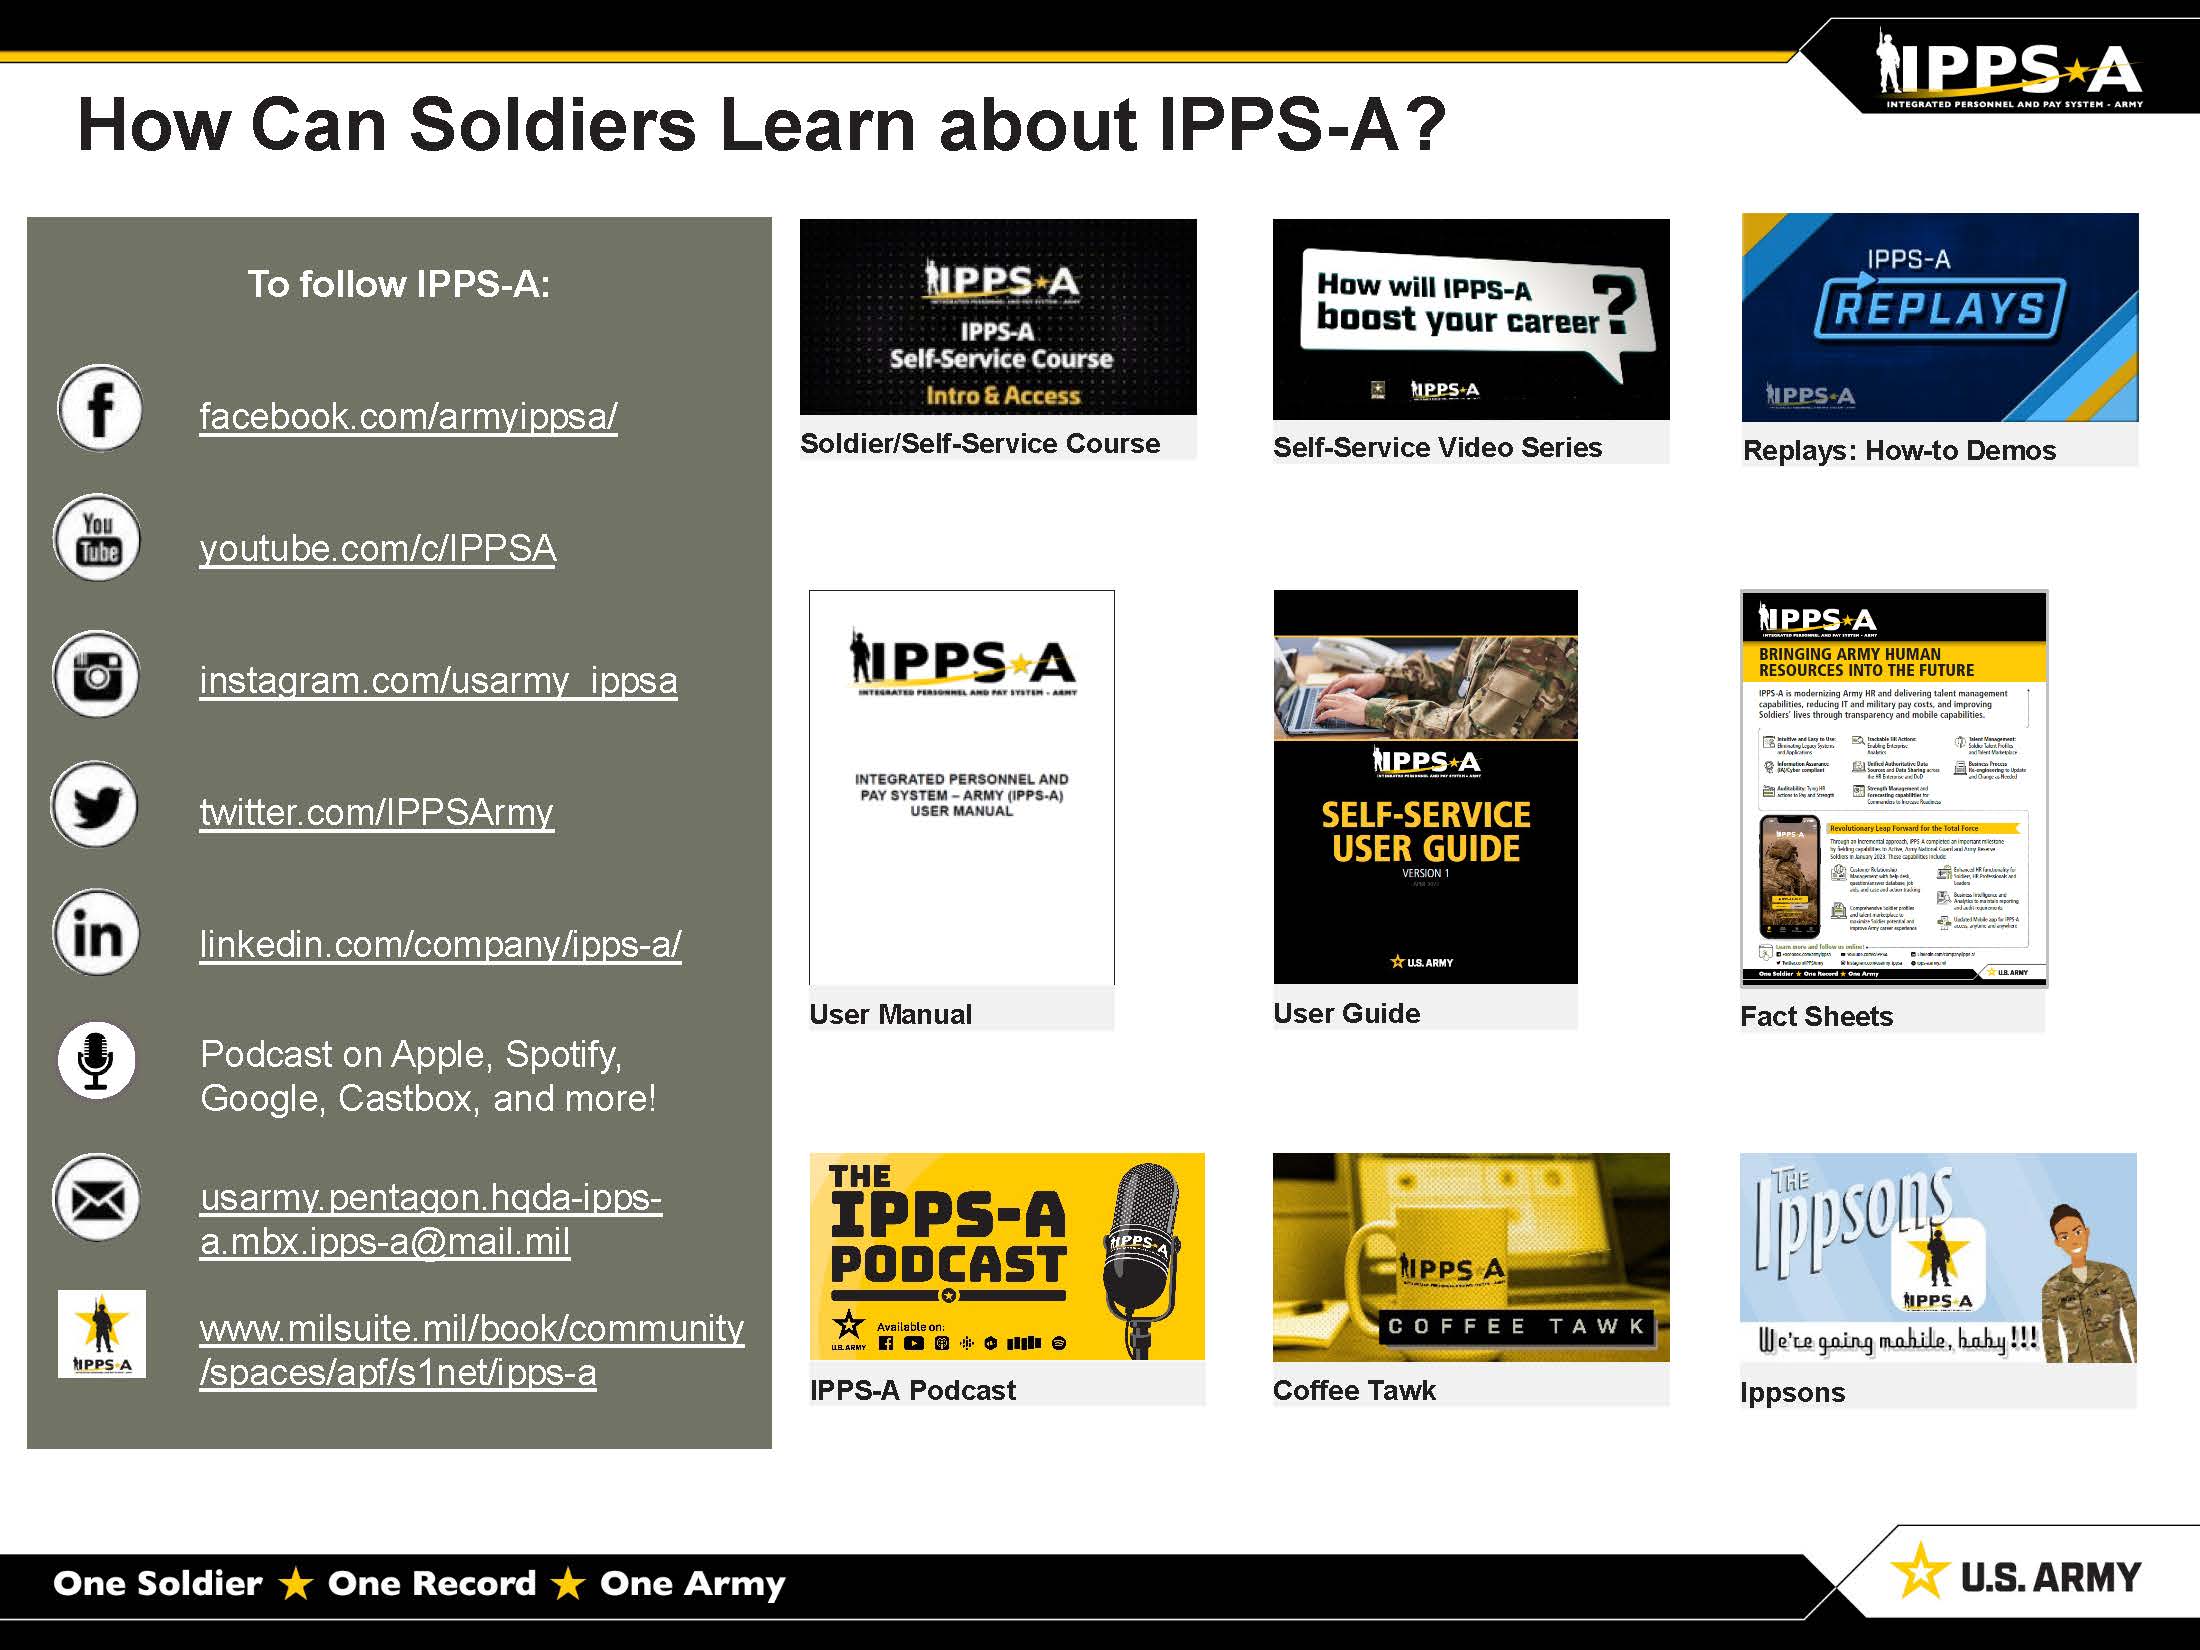 IPPS-A Resources for Soldiers